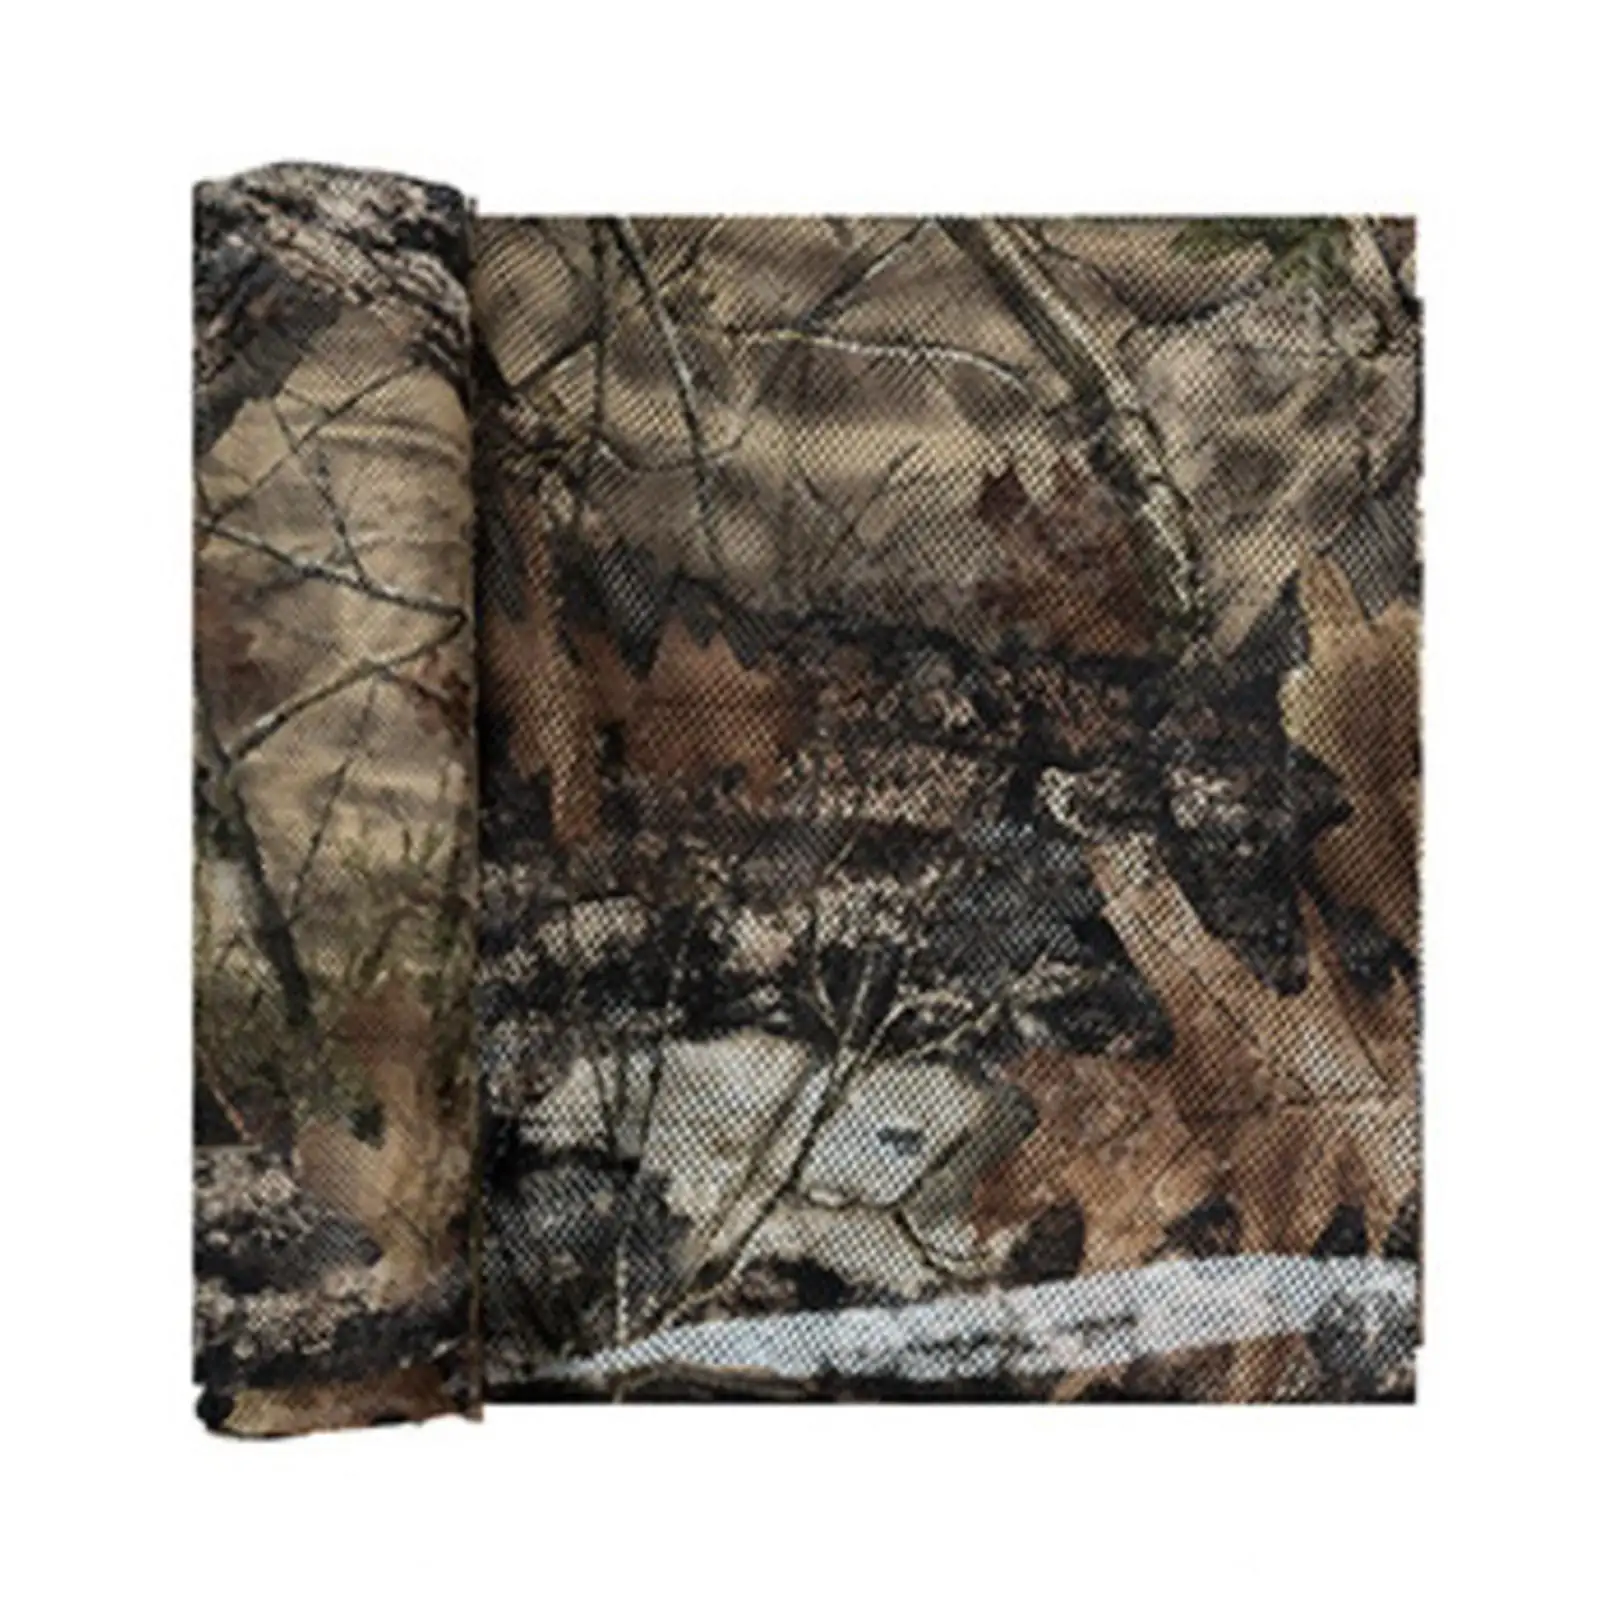 Camo Net Hide Net, Cover Clear, Camo Mesh, Woodland Netting for Photography